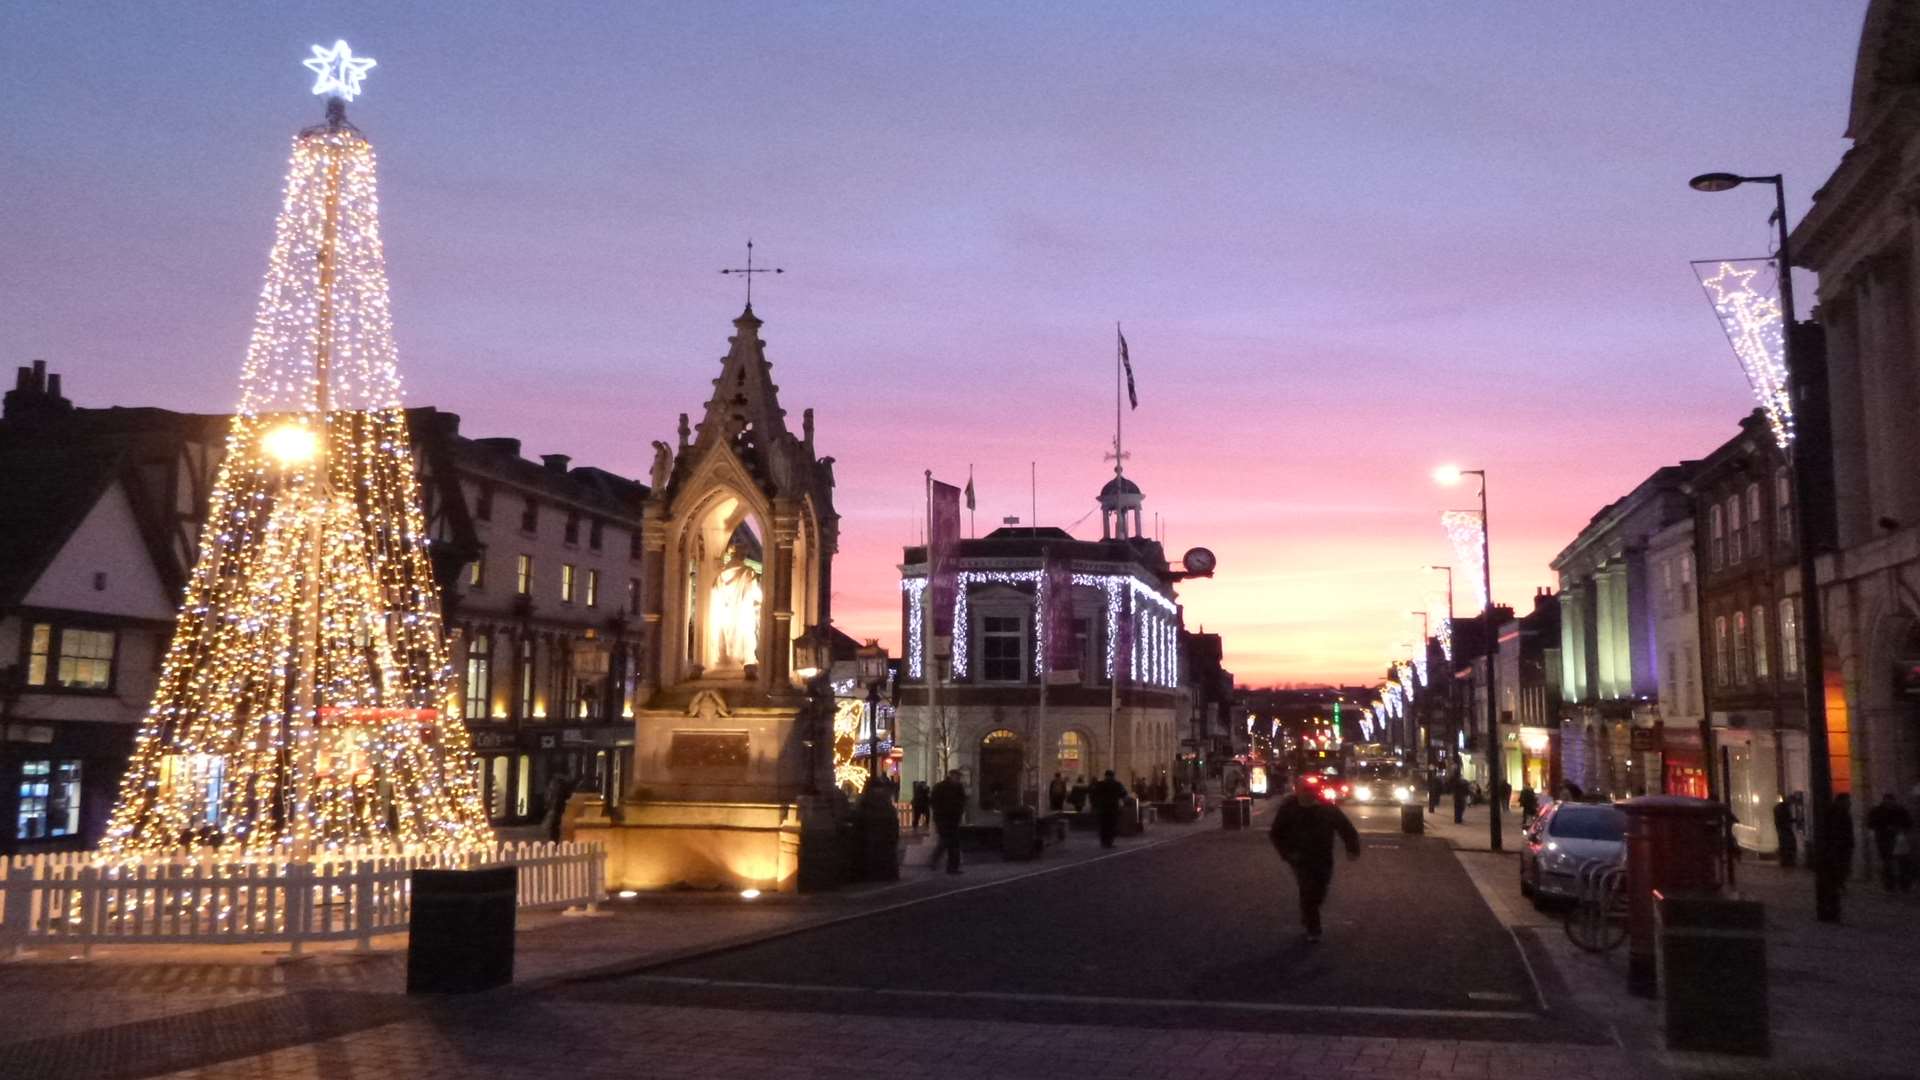 Christmas lights in Maidstone High Street at sunset. Picture: Quentin Morton